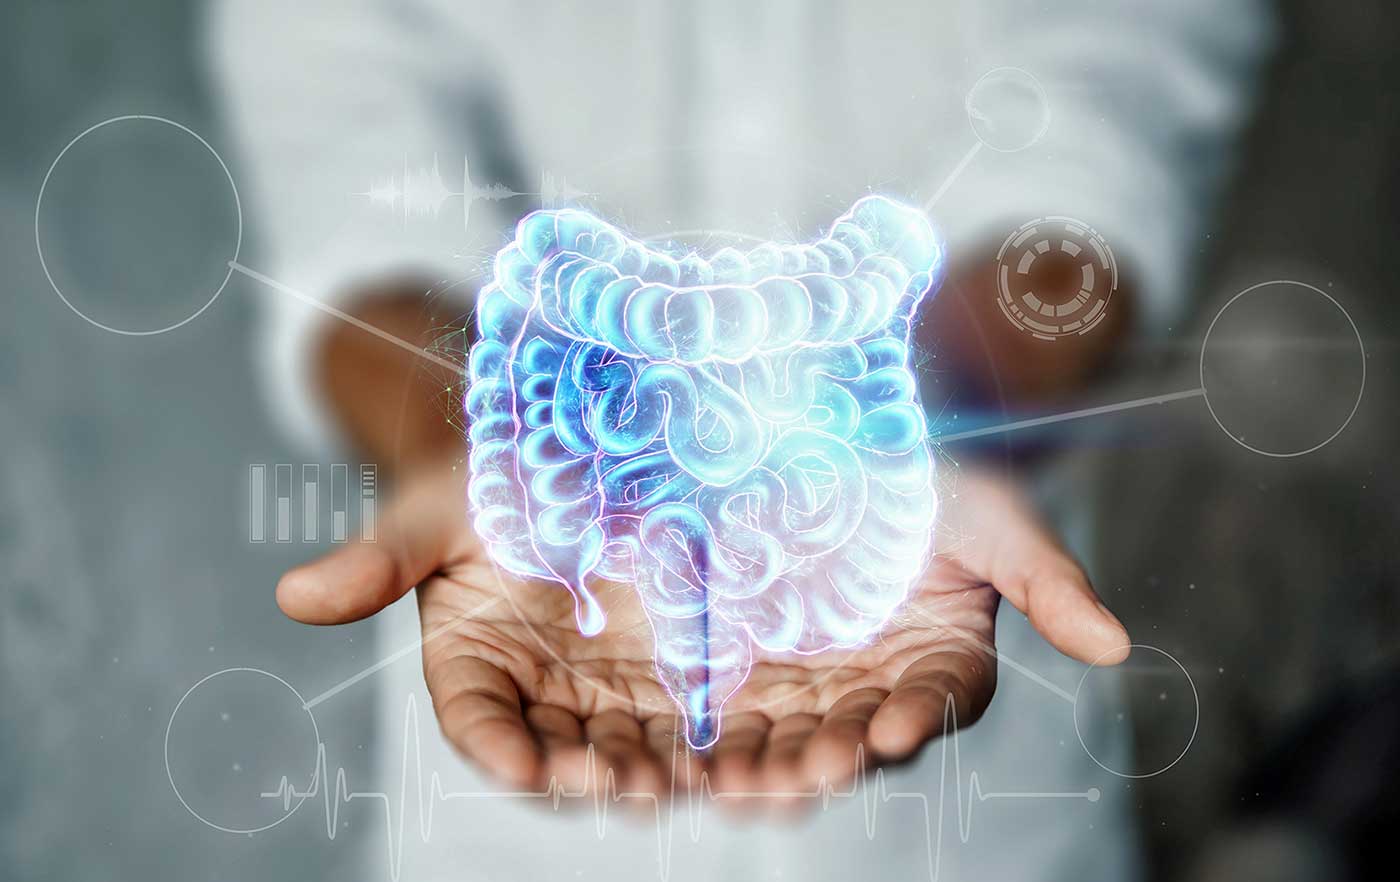 Doctor and holographic bowel scan projection with vital signs and medical records, showing the concept of new technologies and paths to better health.